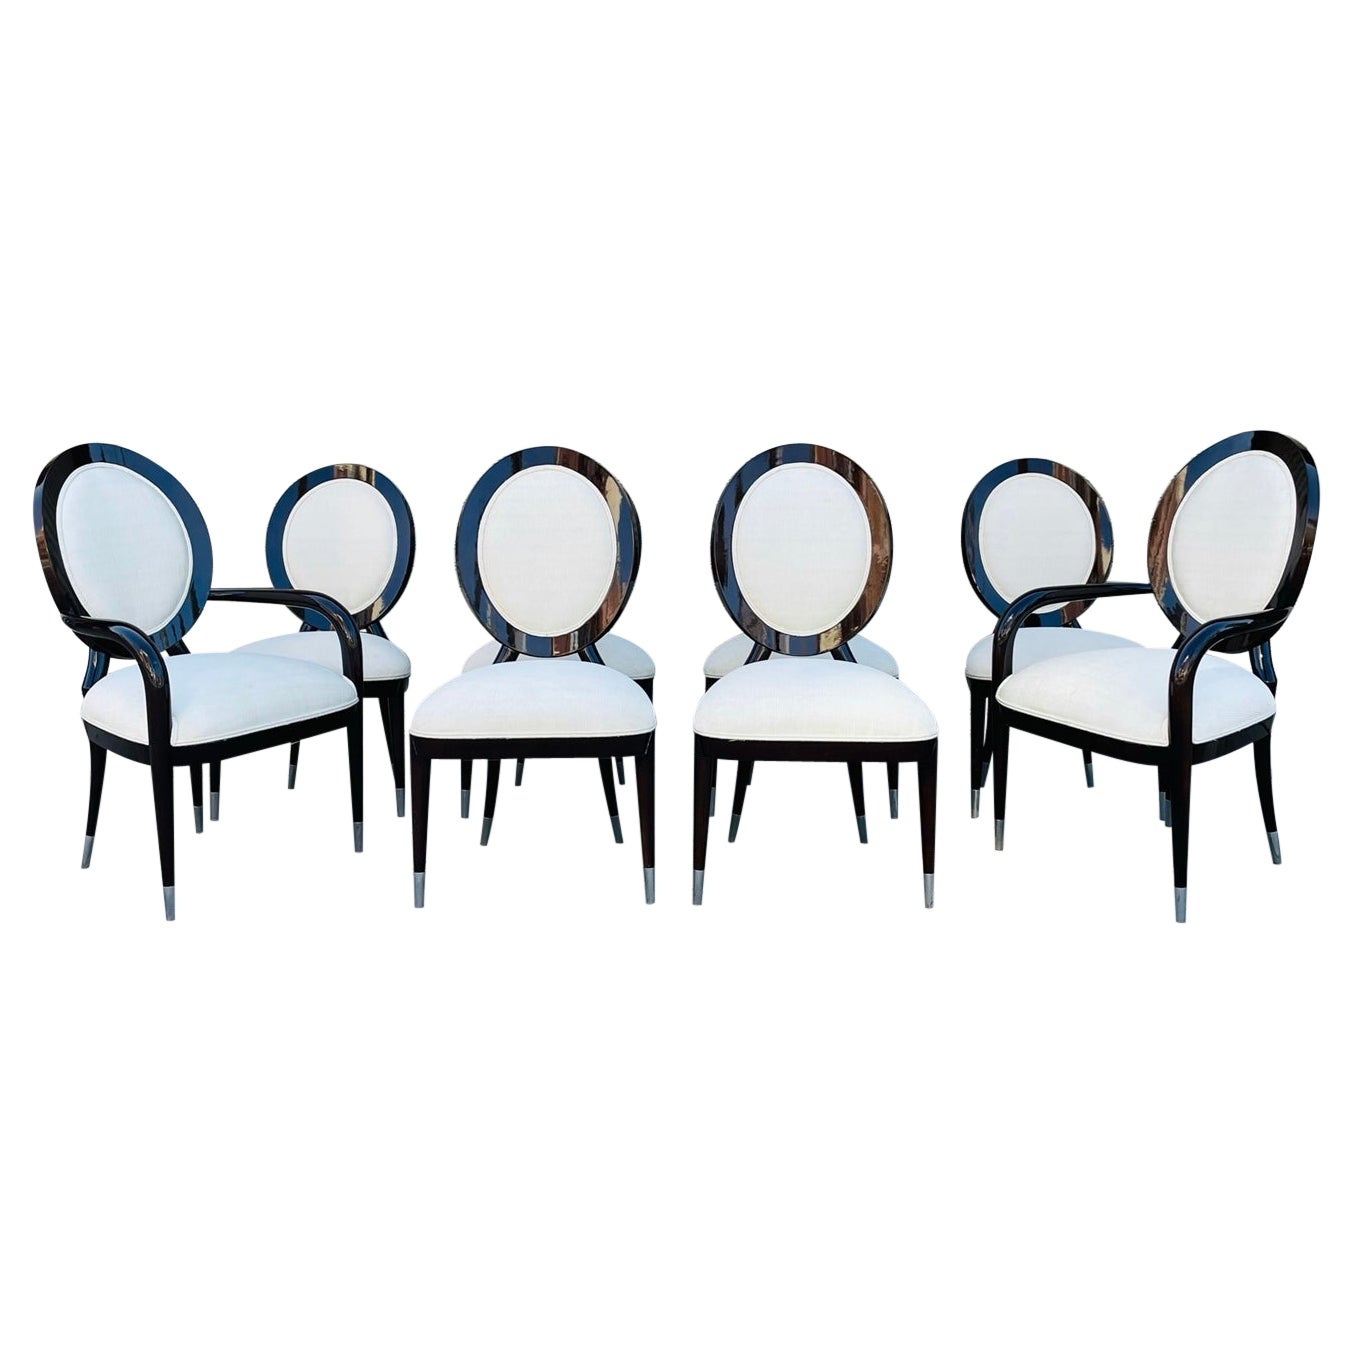 Set of 8 Ballonback Chairs, 6 Side Chairs & 2 Armchairs